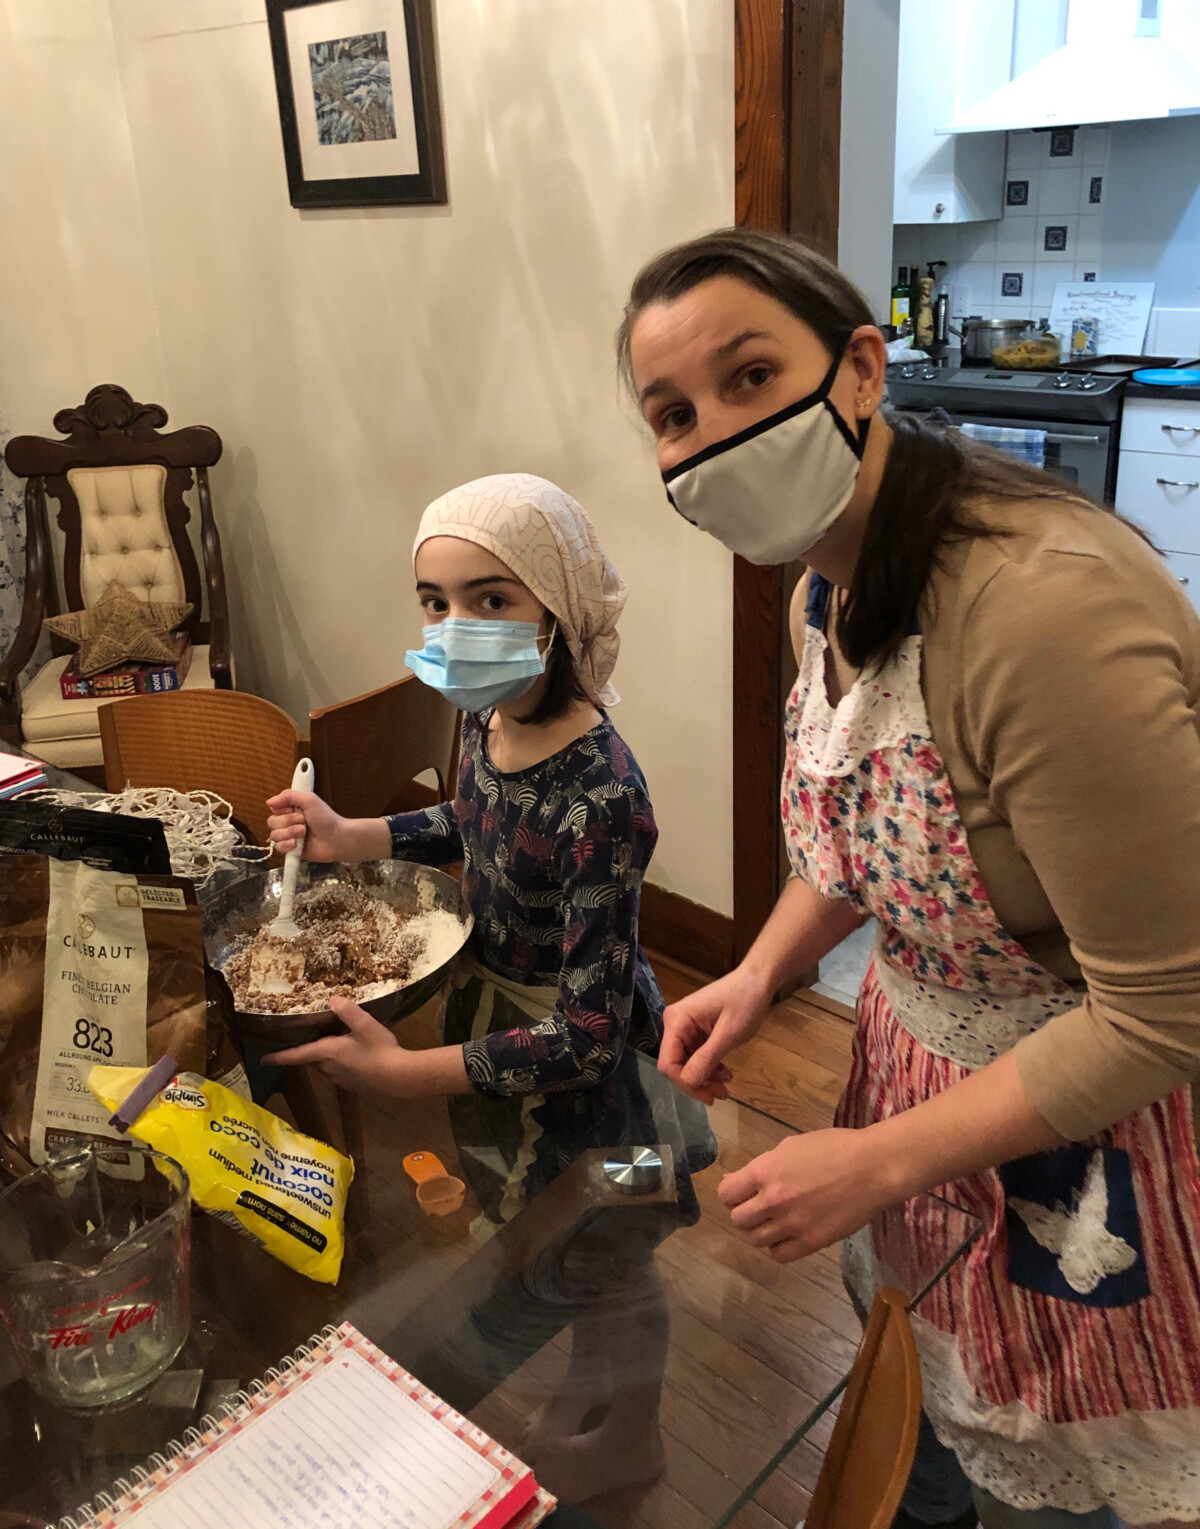 Baking Christmas cookies with our niece - a yearly tradition